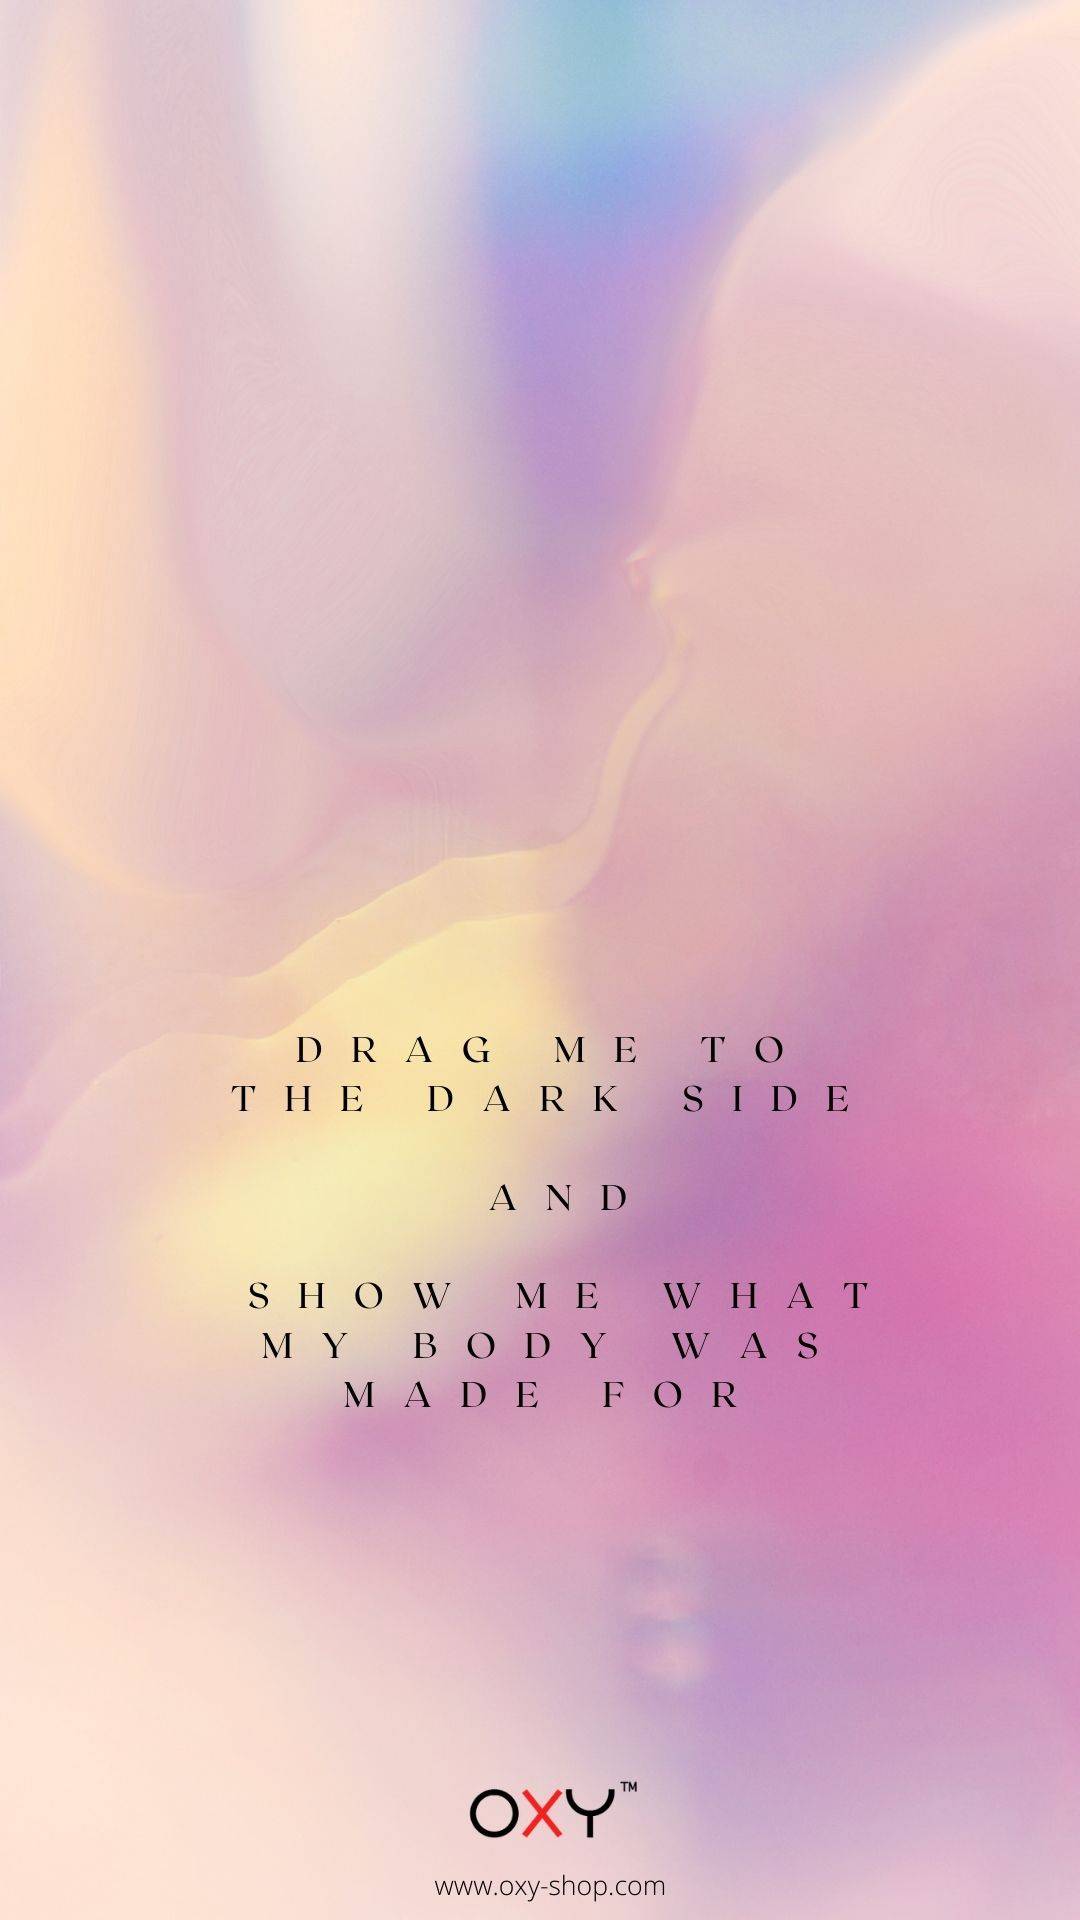 Drag me to the dark side and show me what my body was made for. - BDSM wallpaper